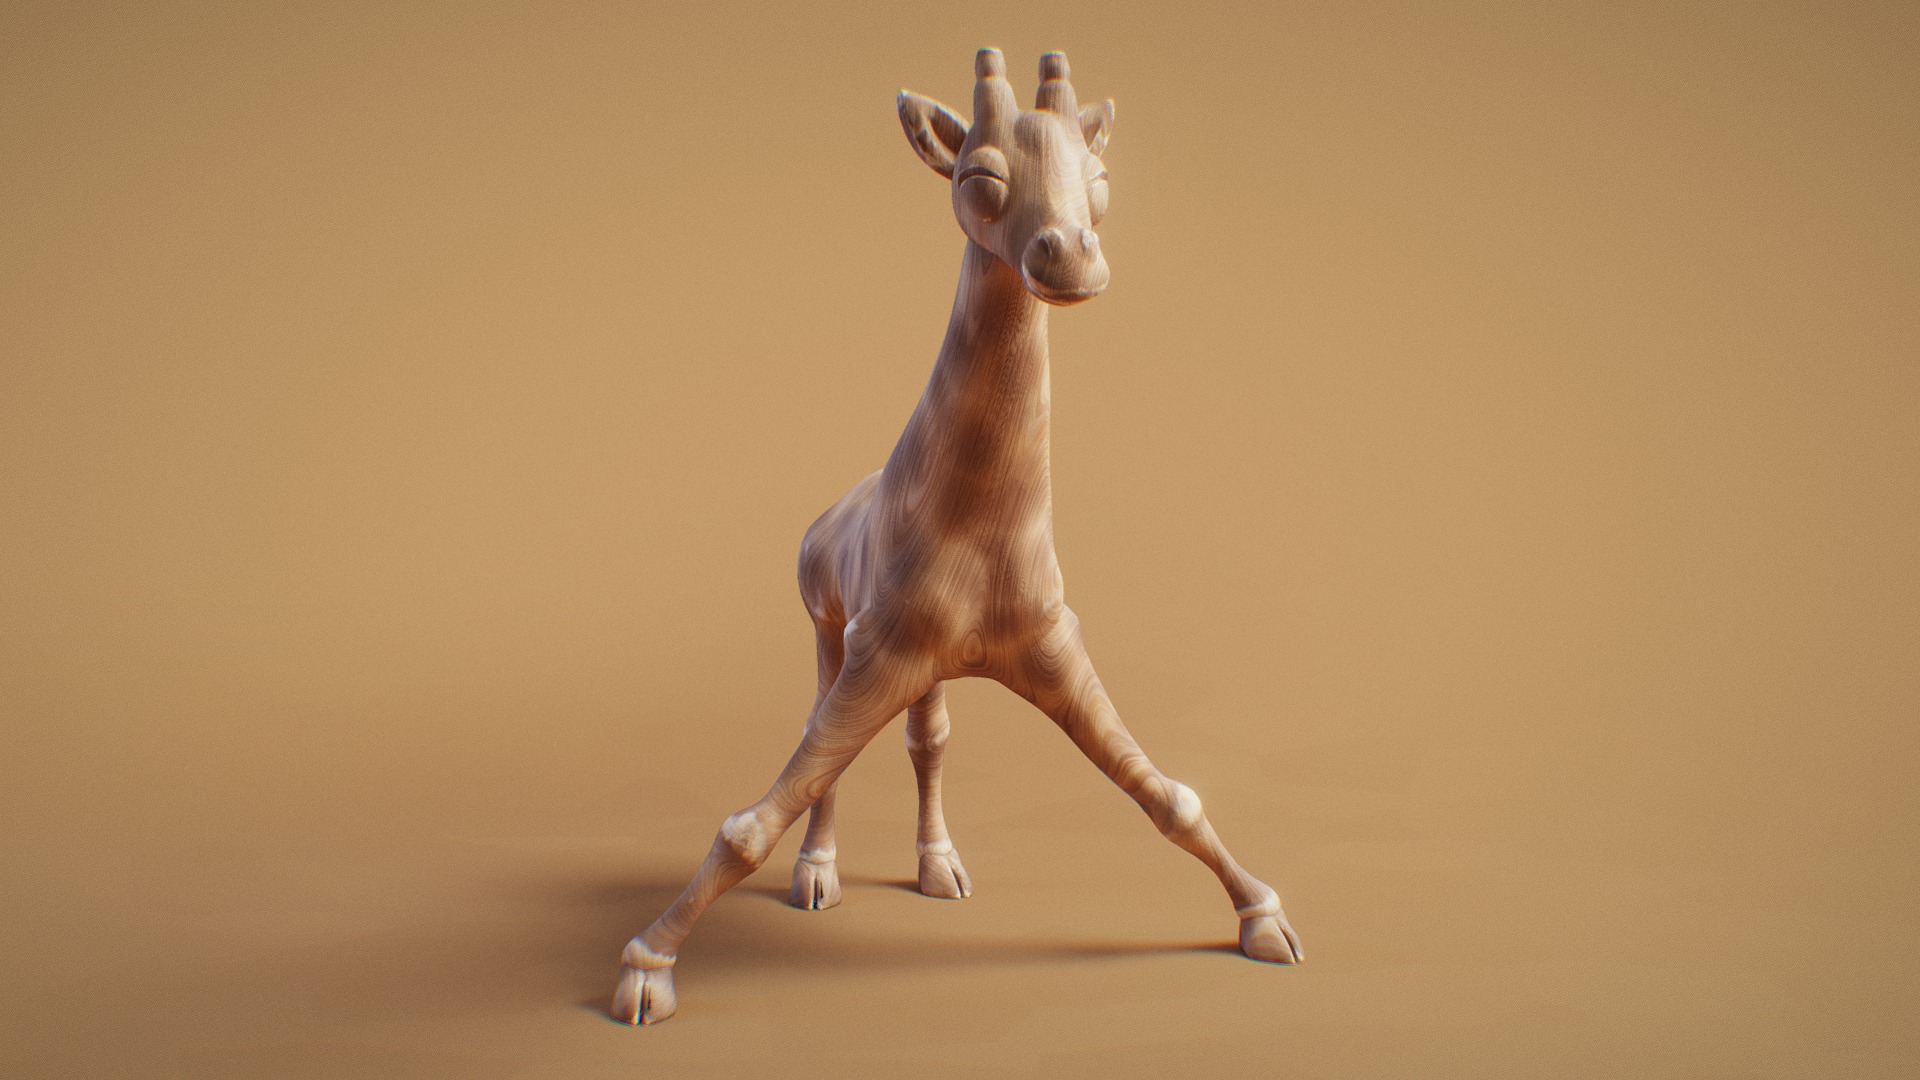 3D model Day 20 – Minimalistic : Split - This is a 3D model of the Day 20 - Minimalistic : Split. The 3D model is about a small statue of a giraffe.